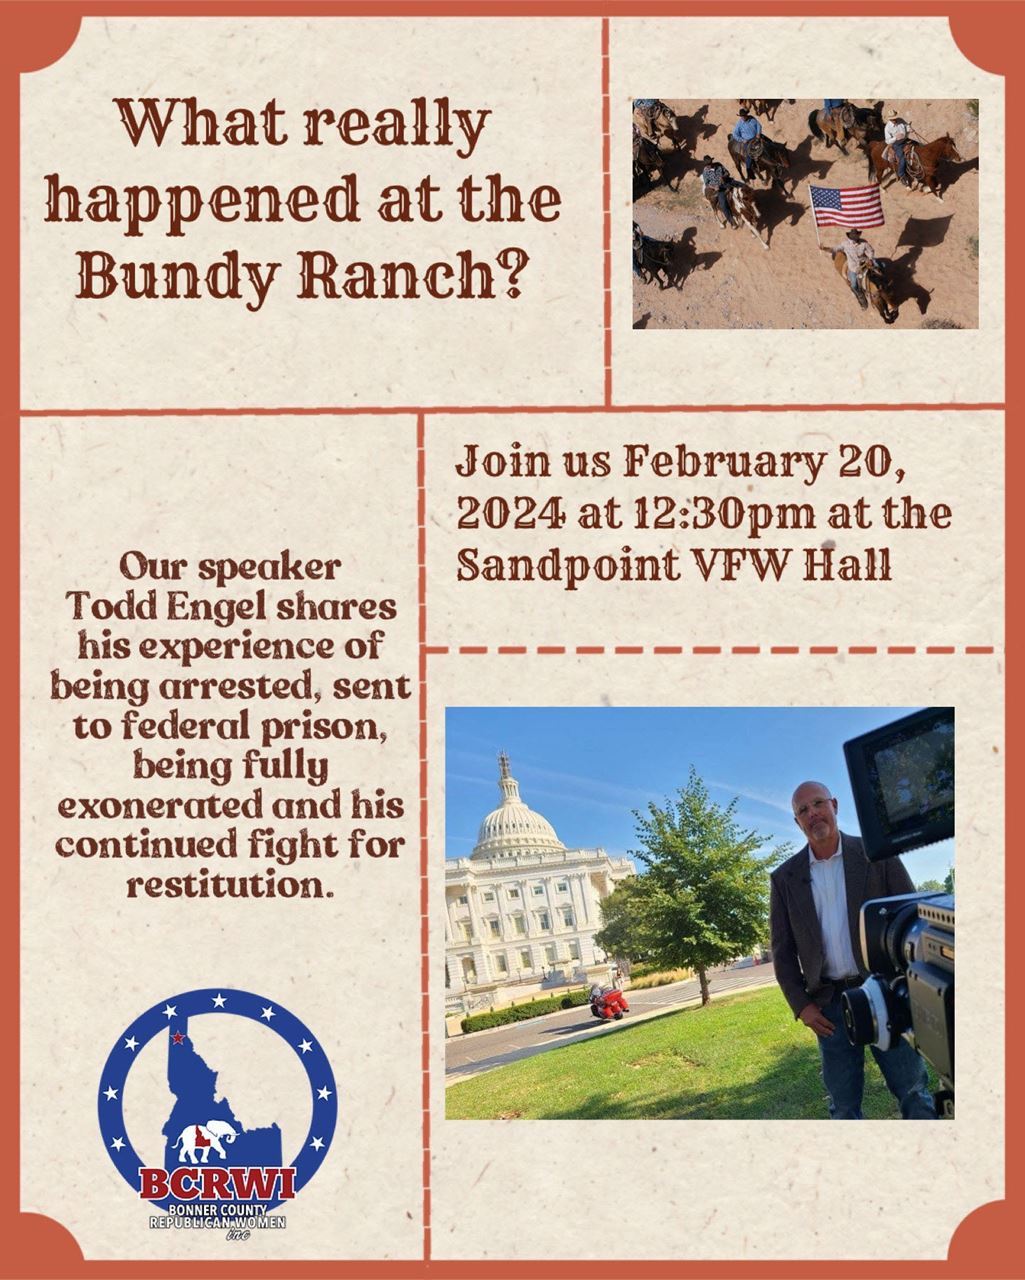 What really happened at the Bundy Ranch?